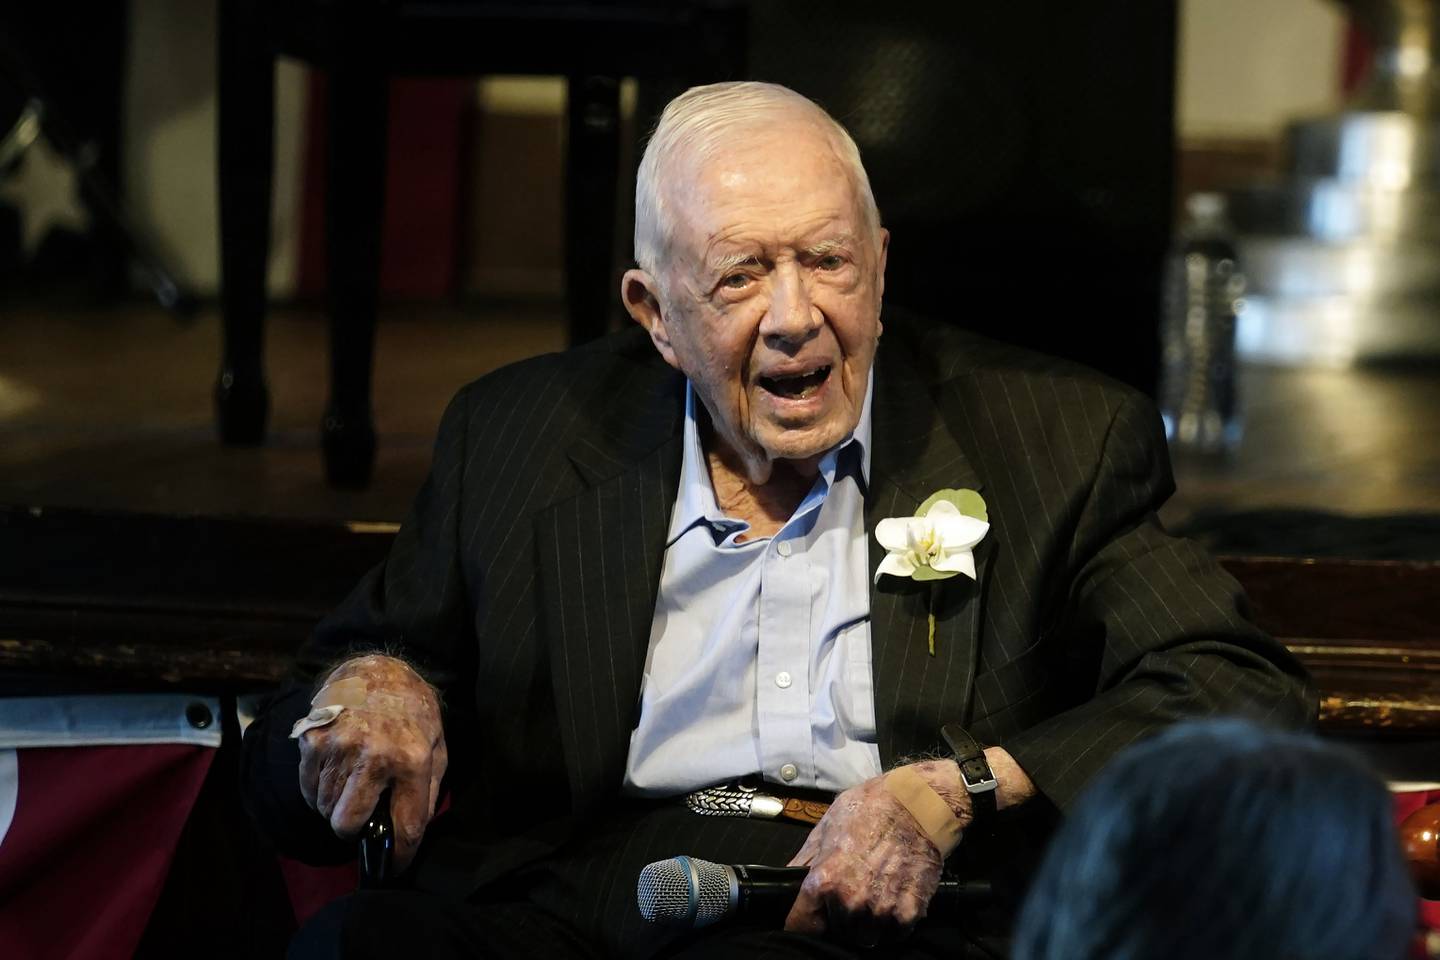 Former President Jimmy Carter reacts as his wife Rosalynn Carter speaks during a reception to celebrate their 75th wedding anniversary Saturday, July 10, 2021, in Plains, Ga.. (AP Photo/John Bazemore, Pool)